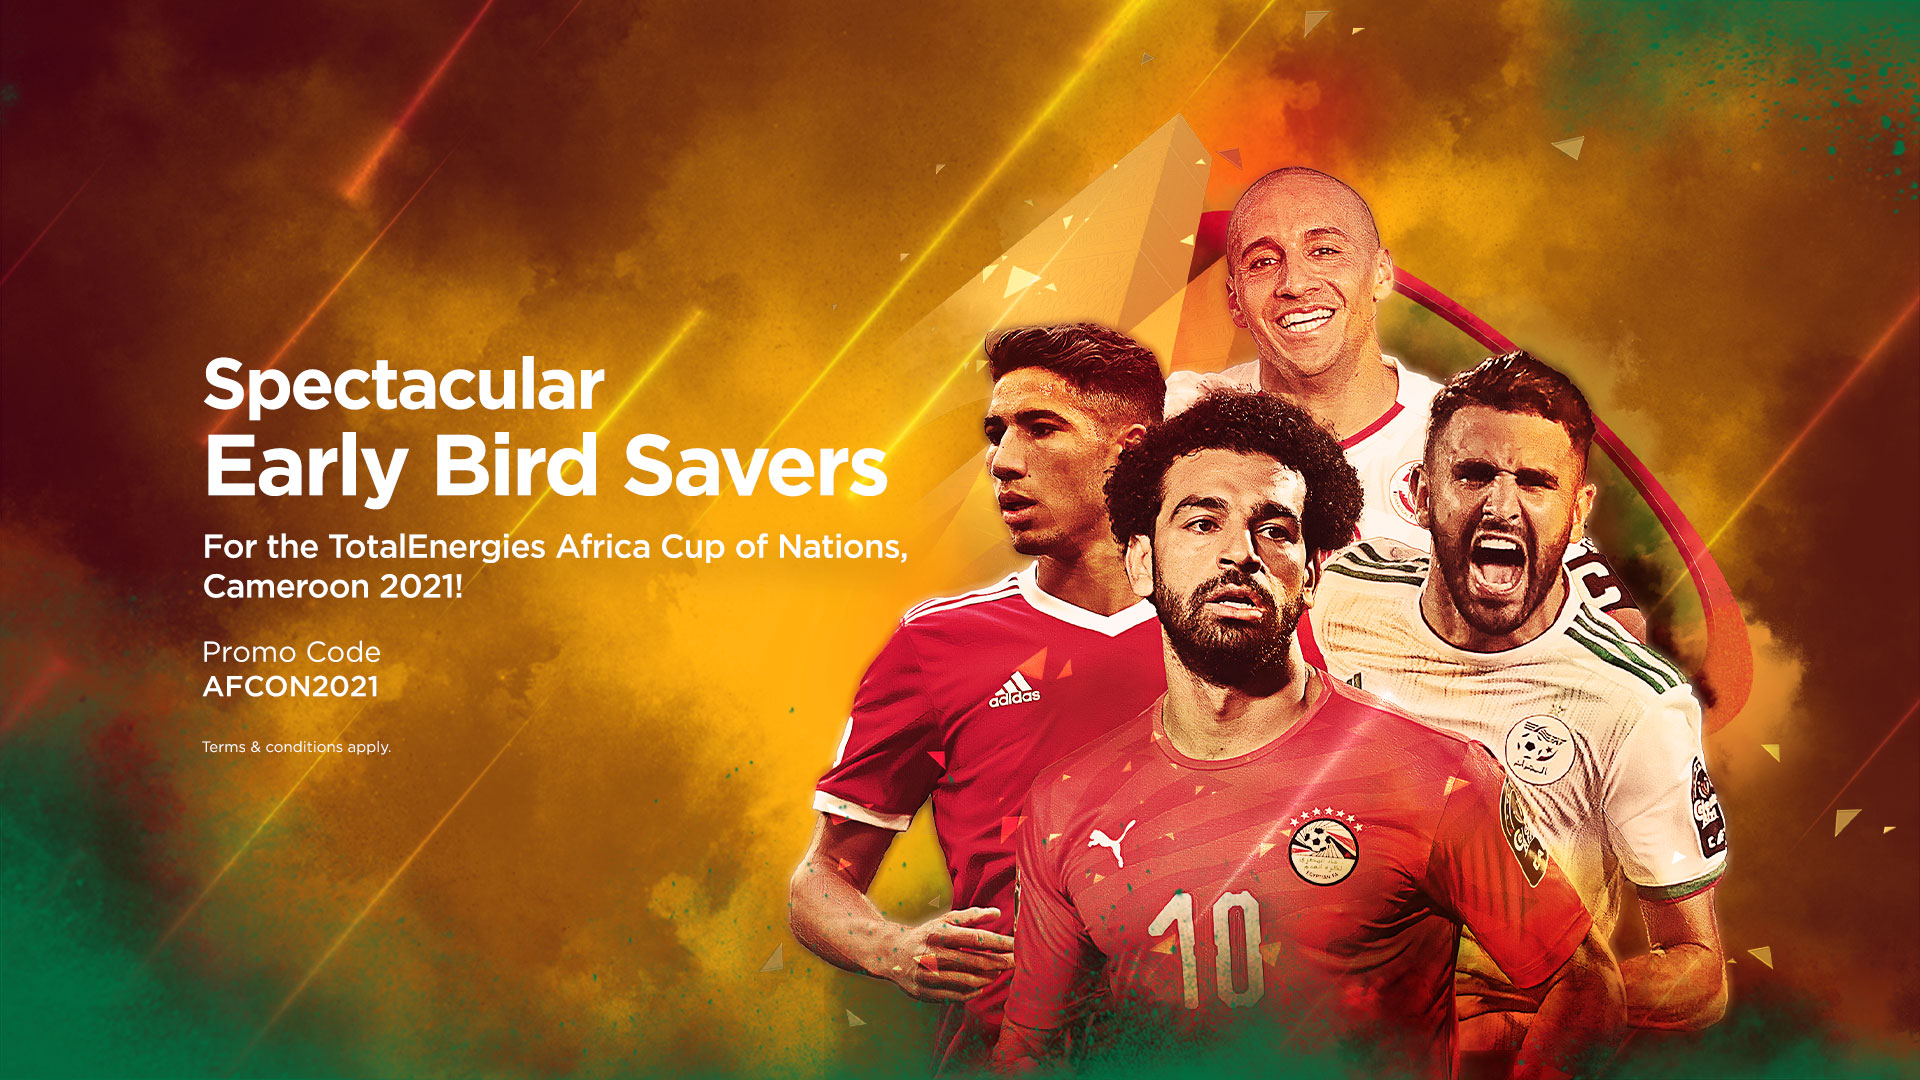 beIN Offers Spectacular Early Bird Savers to Enjoy TotalEnergies Africa Cup of Nations Cameroon 2021